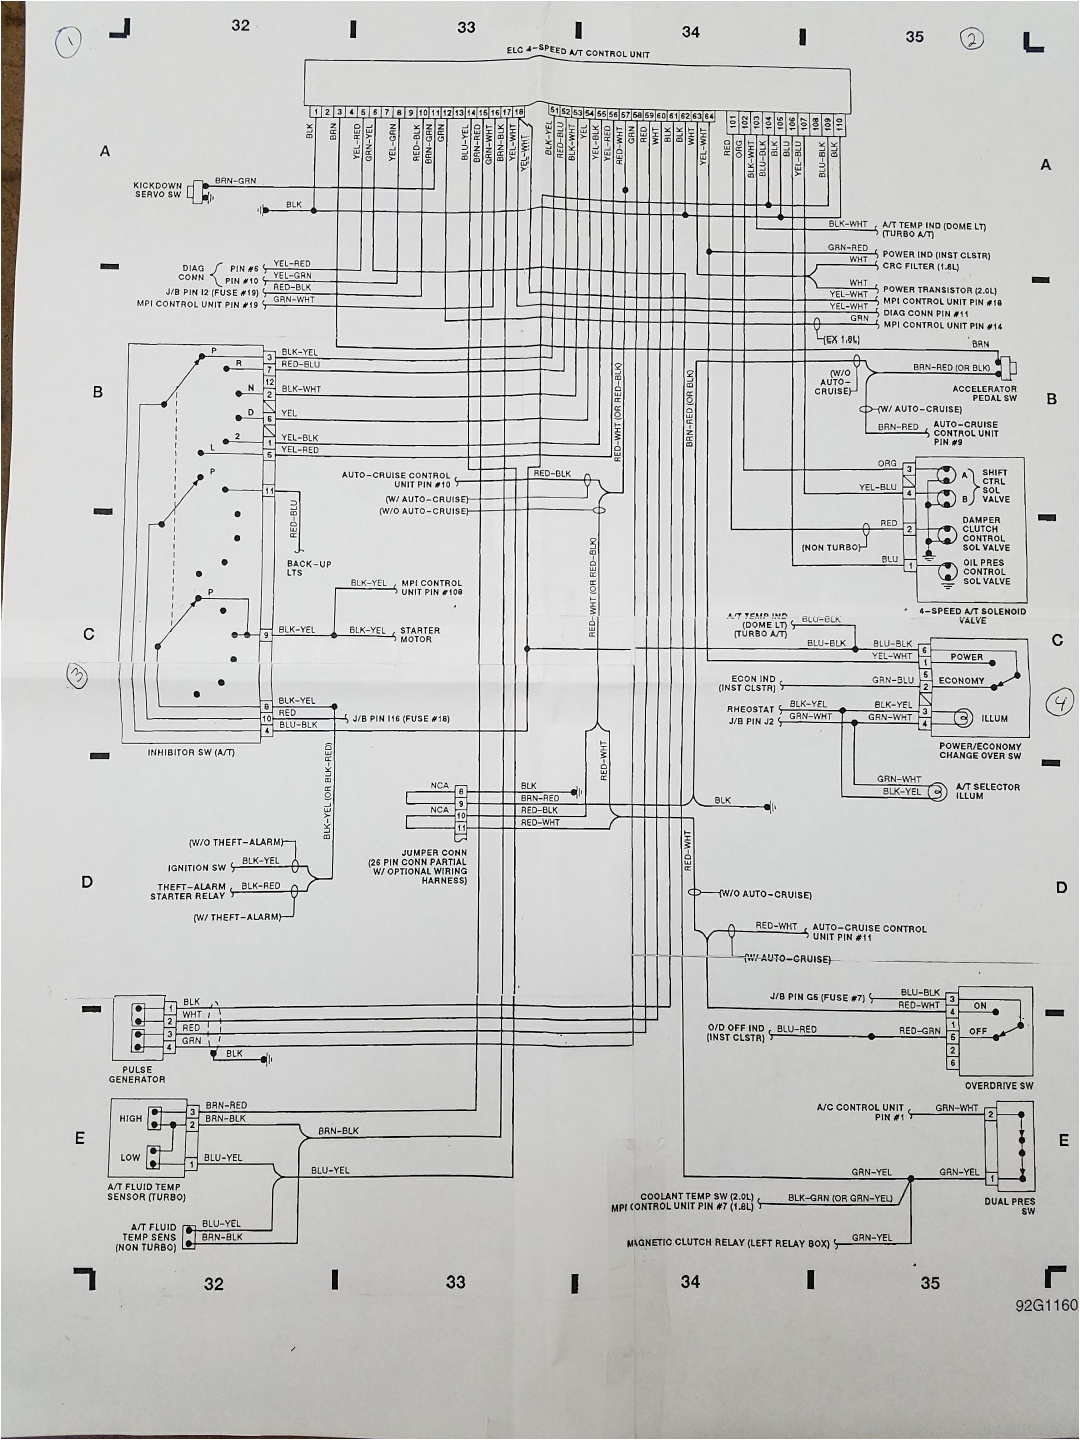 1g trans electrical diagram picture 2 jpg